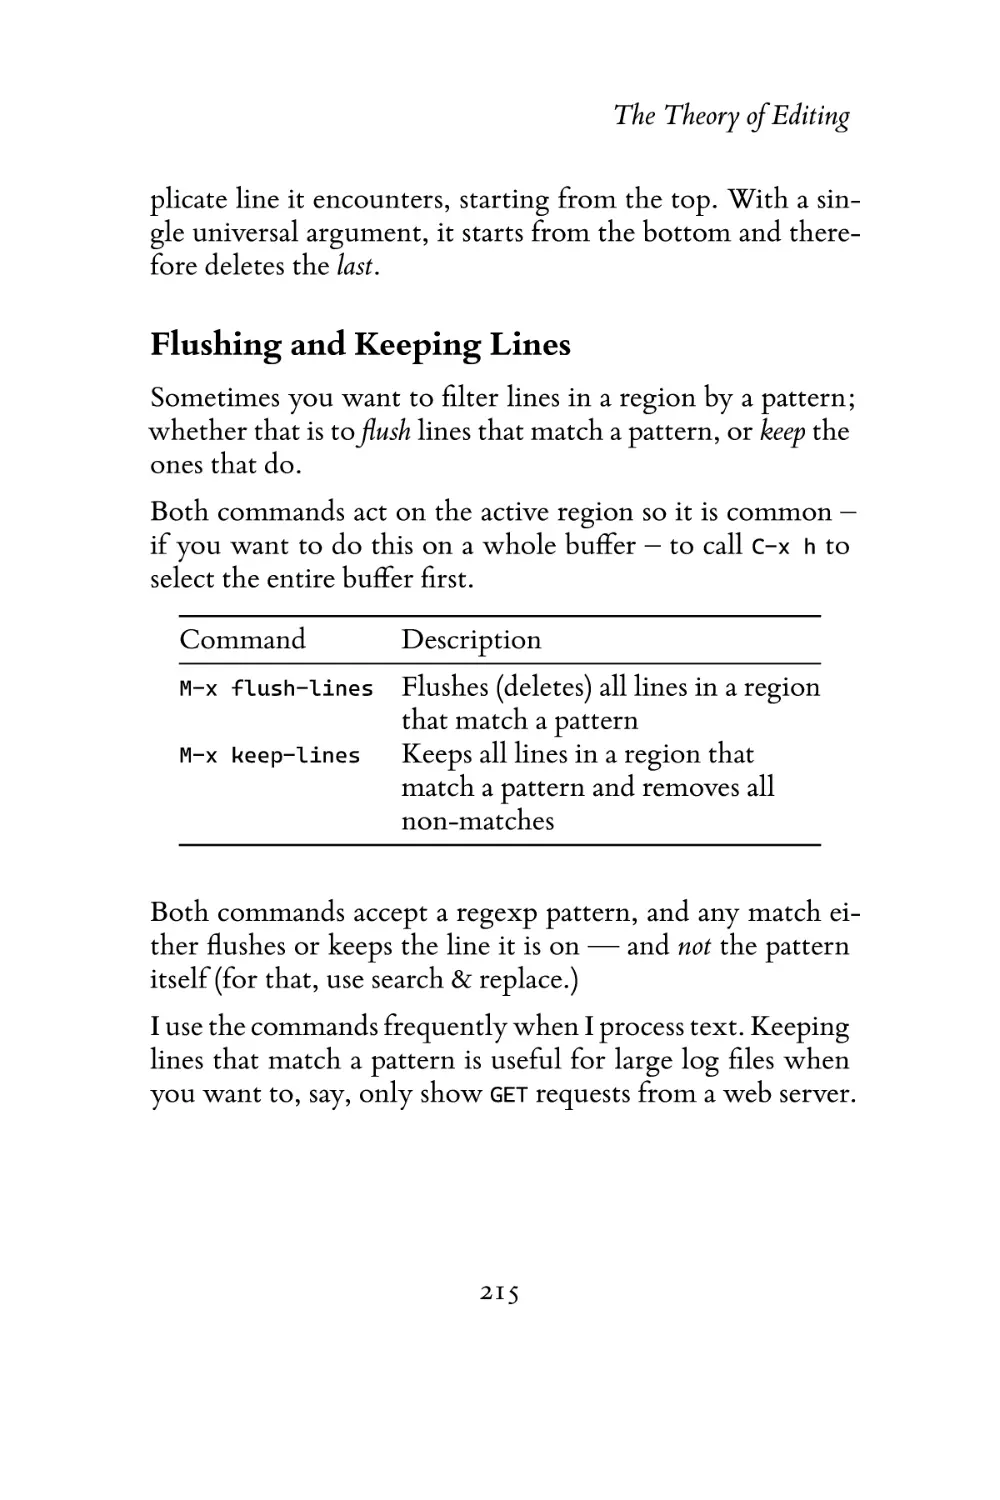 Flushing and Keeping Lines